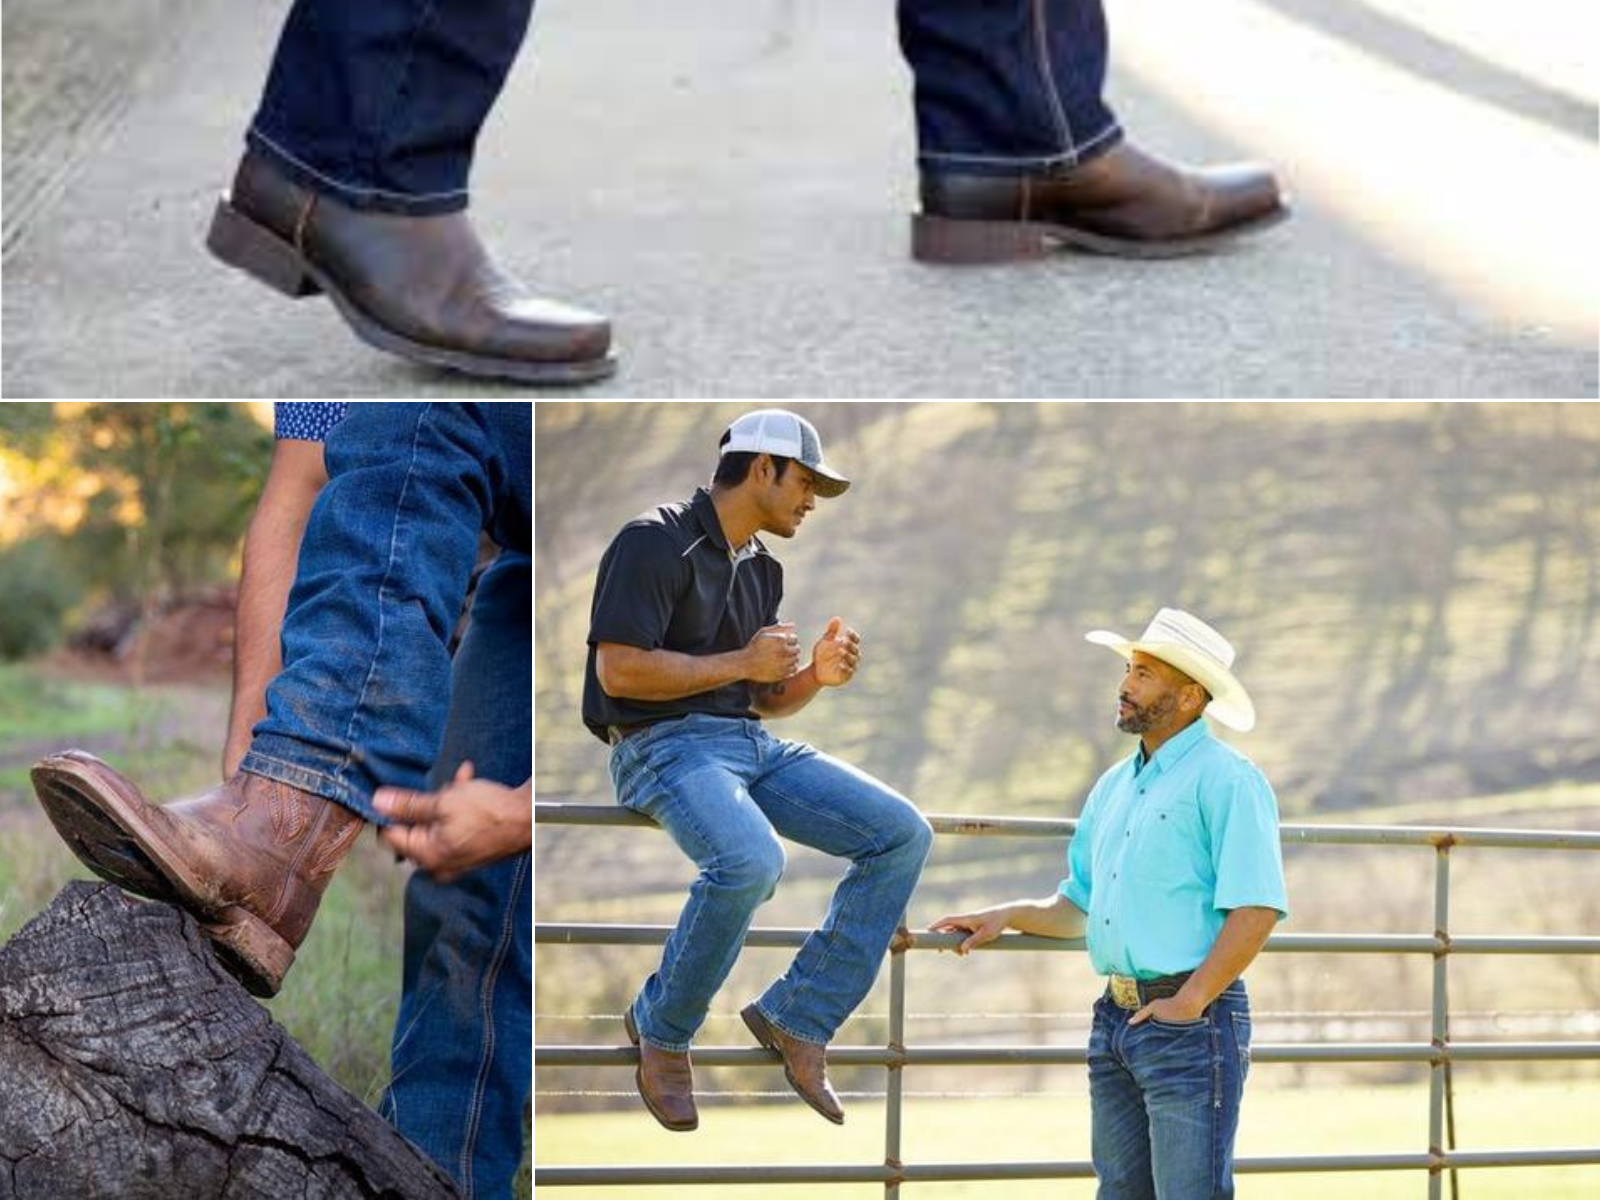 A guy pulling down jeans over his boots, another mans feet as he walks in Ariat's, and men talking while 1 sits on a fence.